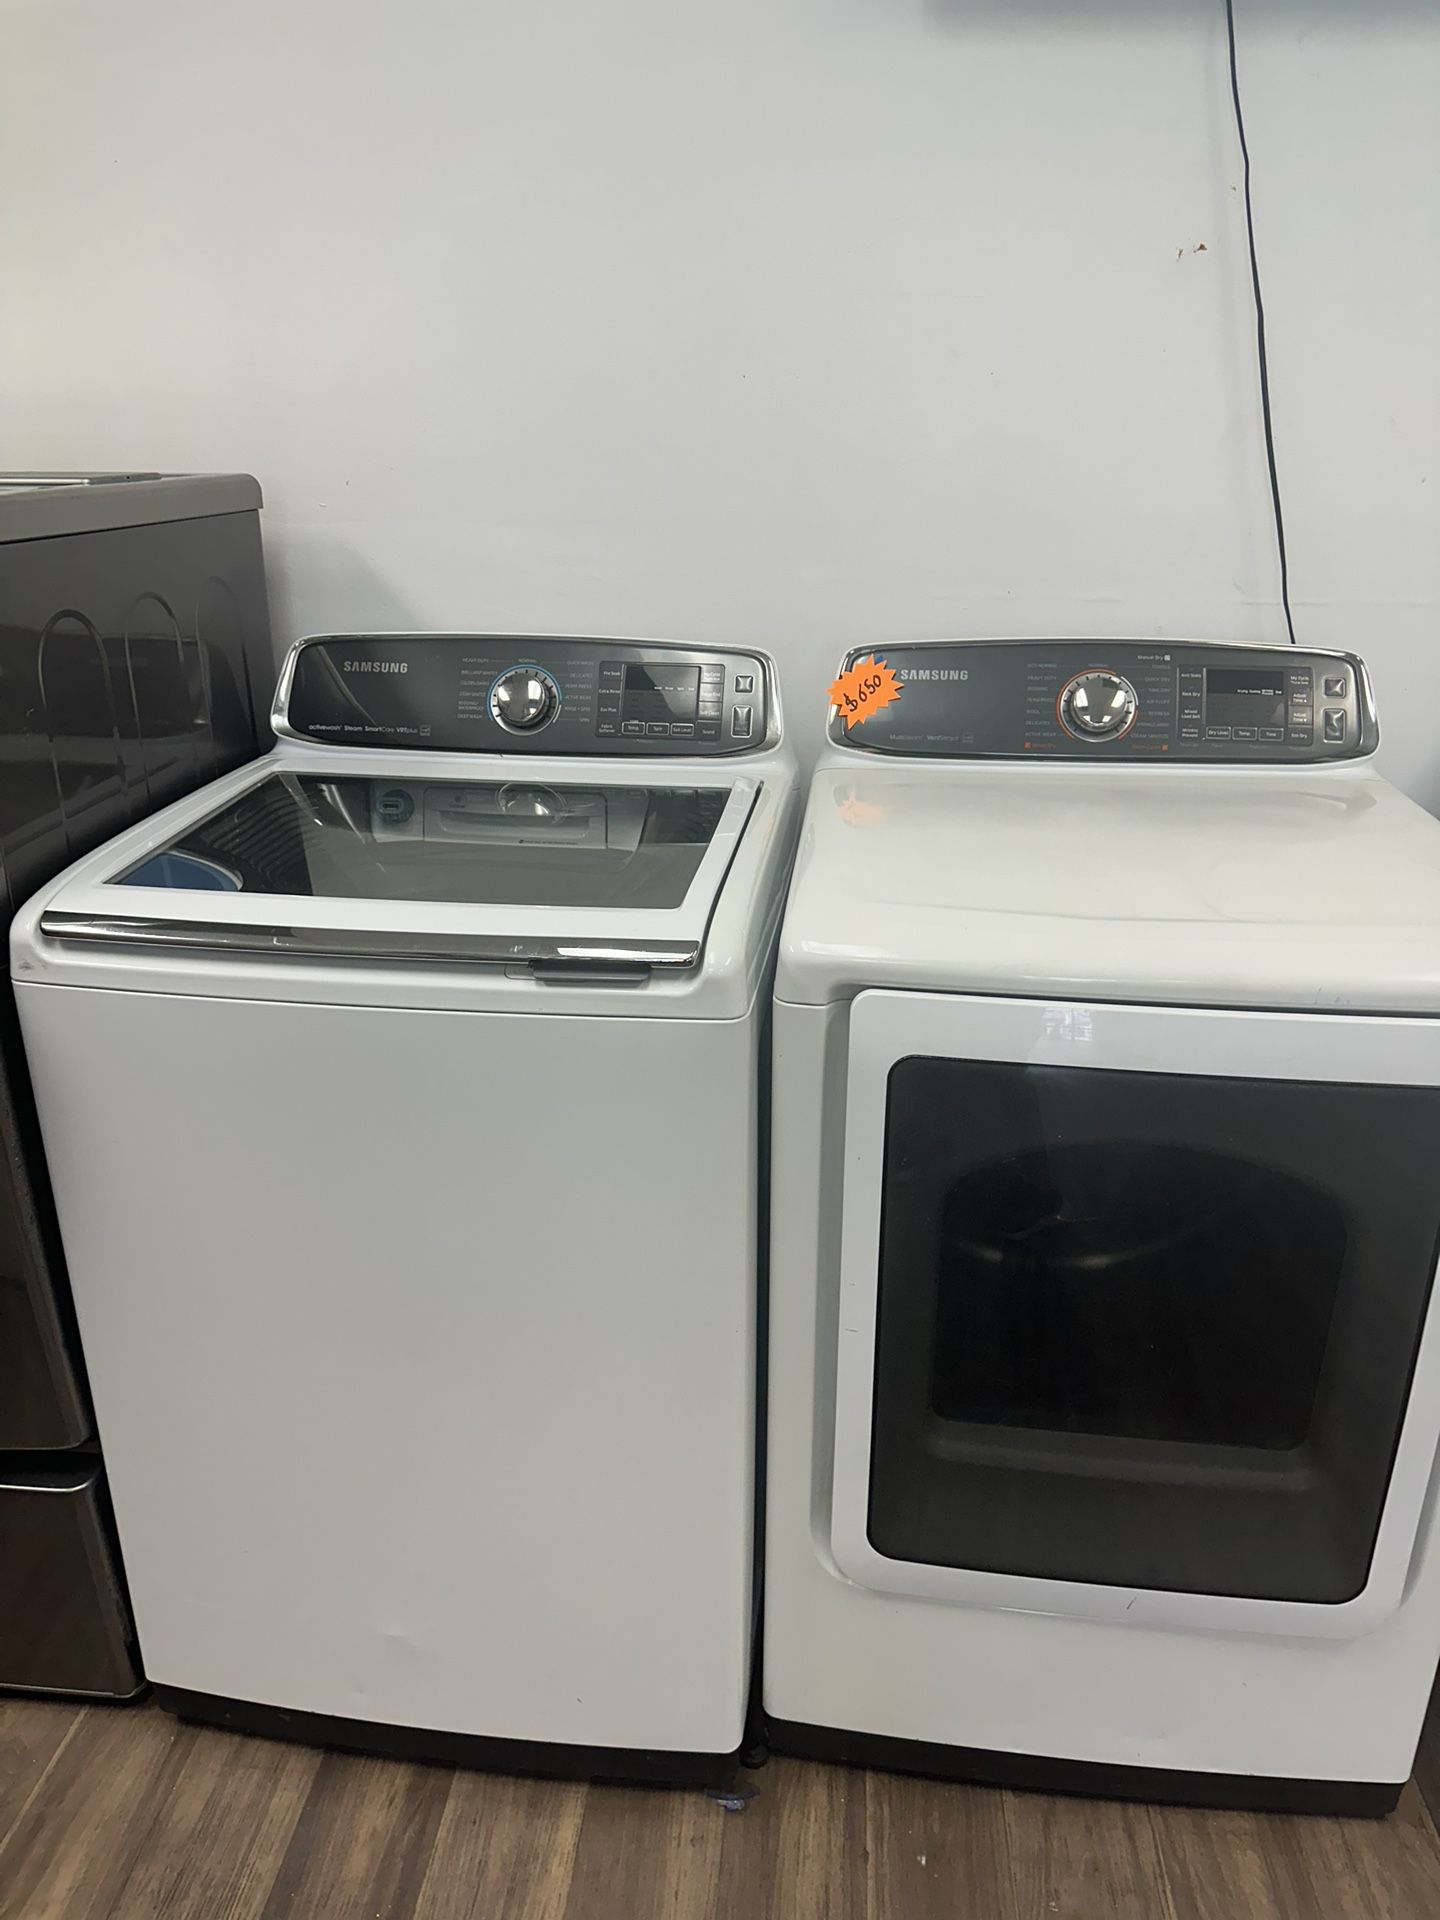 Washer And Dryer Free Deliver 